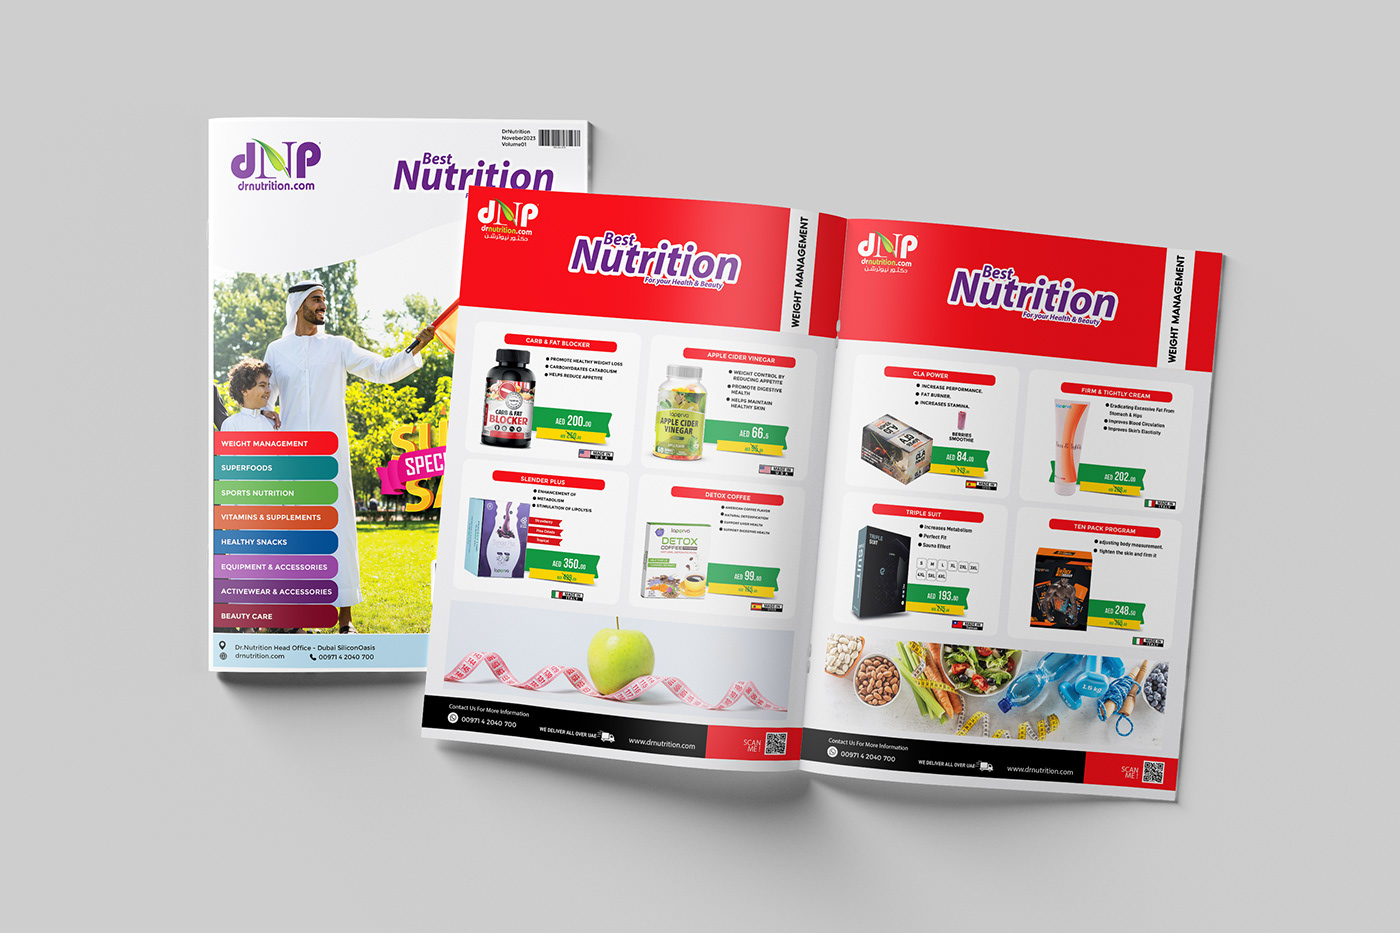 nutrition vitamins minerals magazine Catalogue offers supplements brand identity Social media post Advertising 